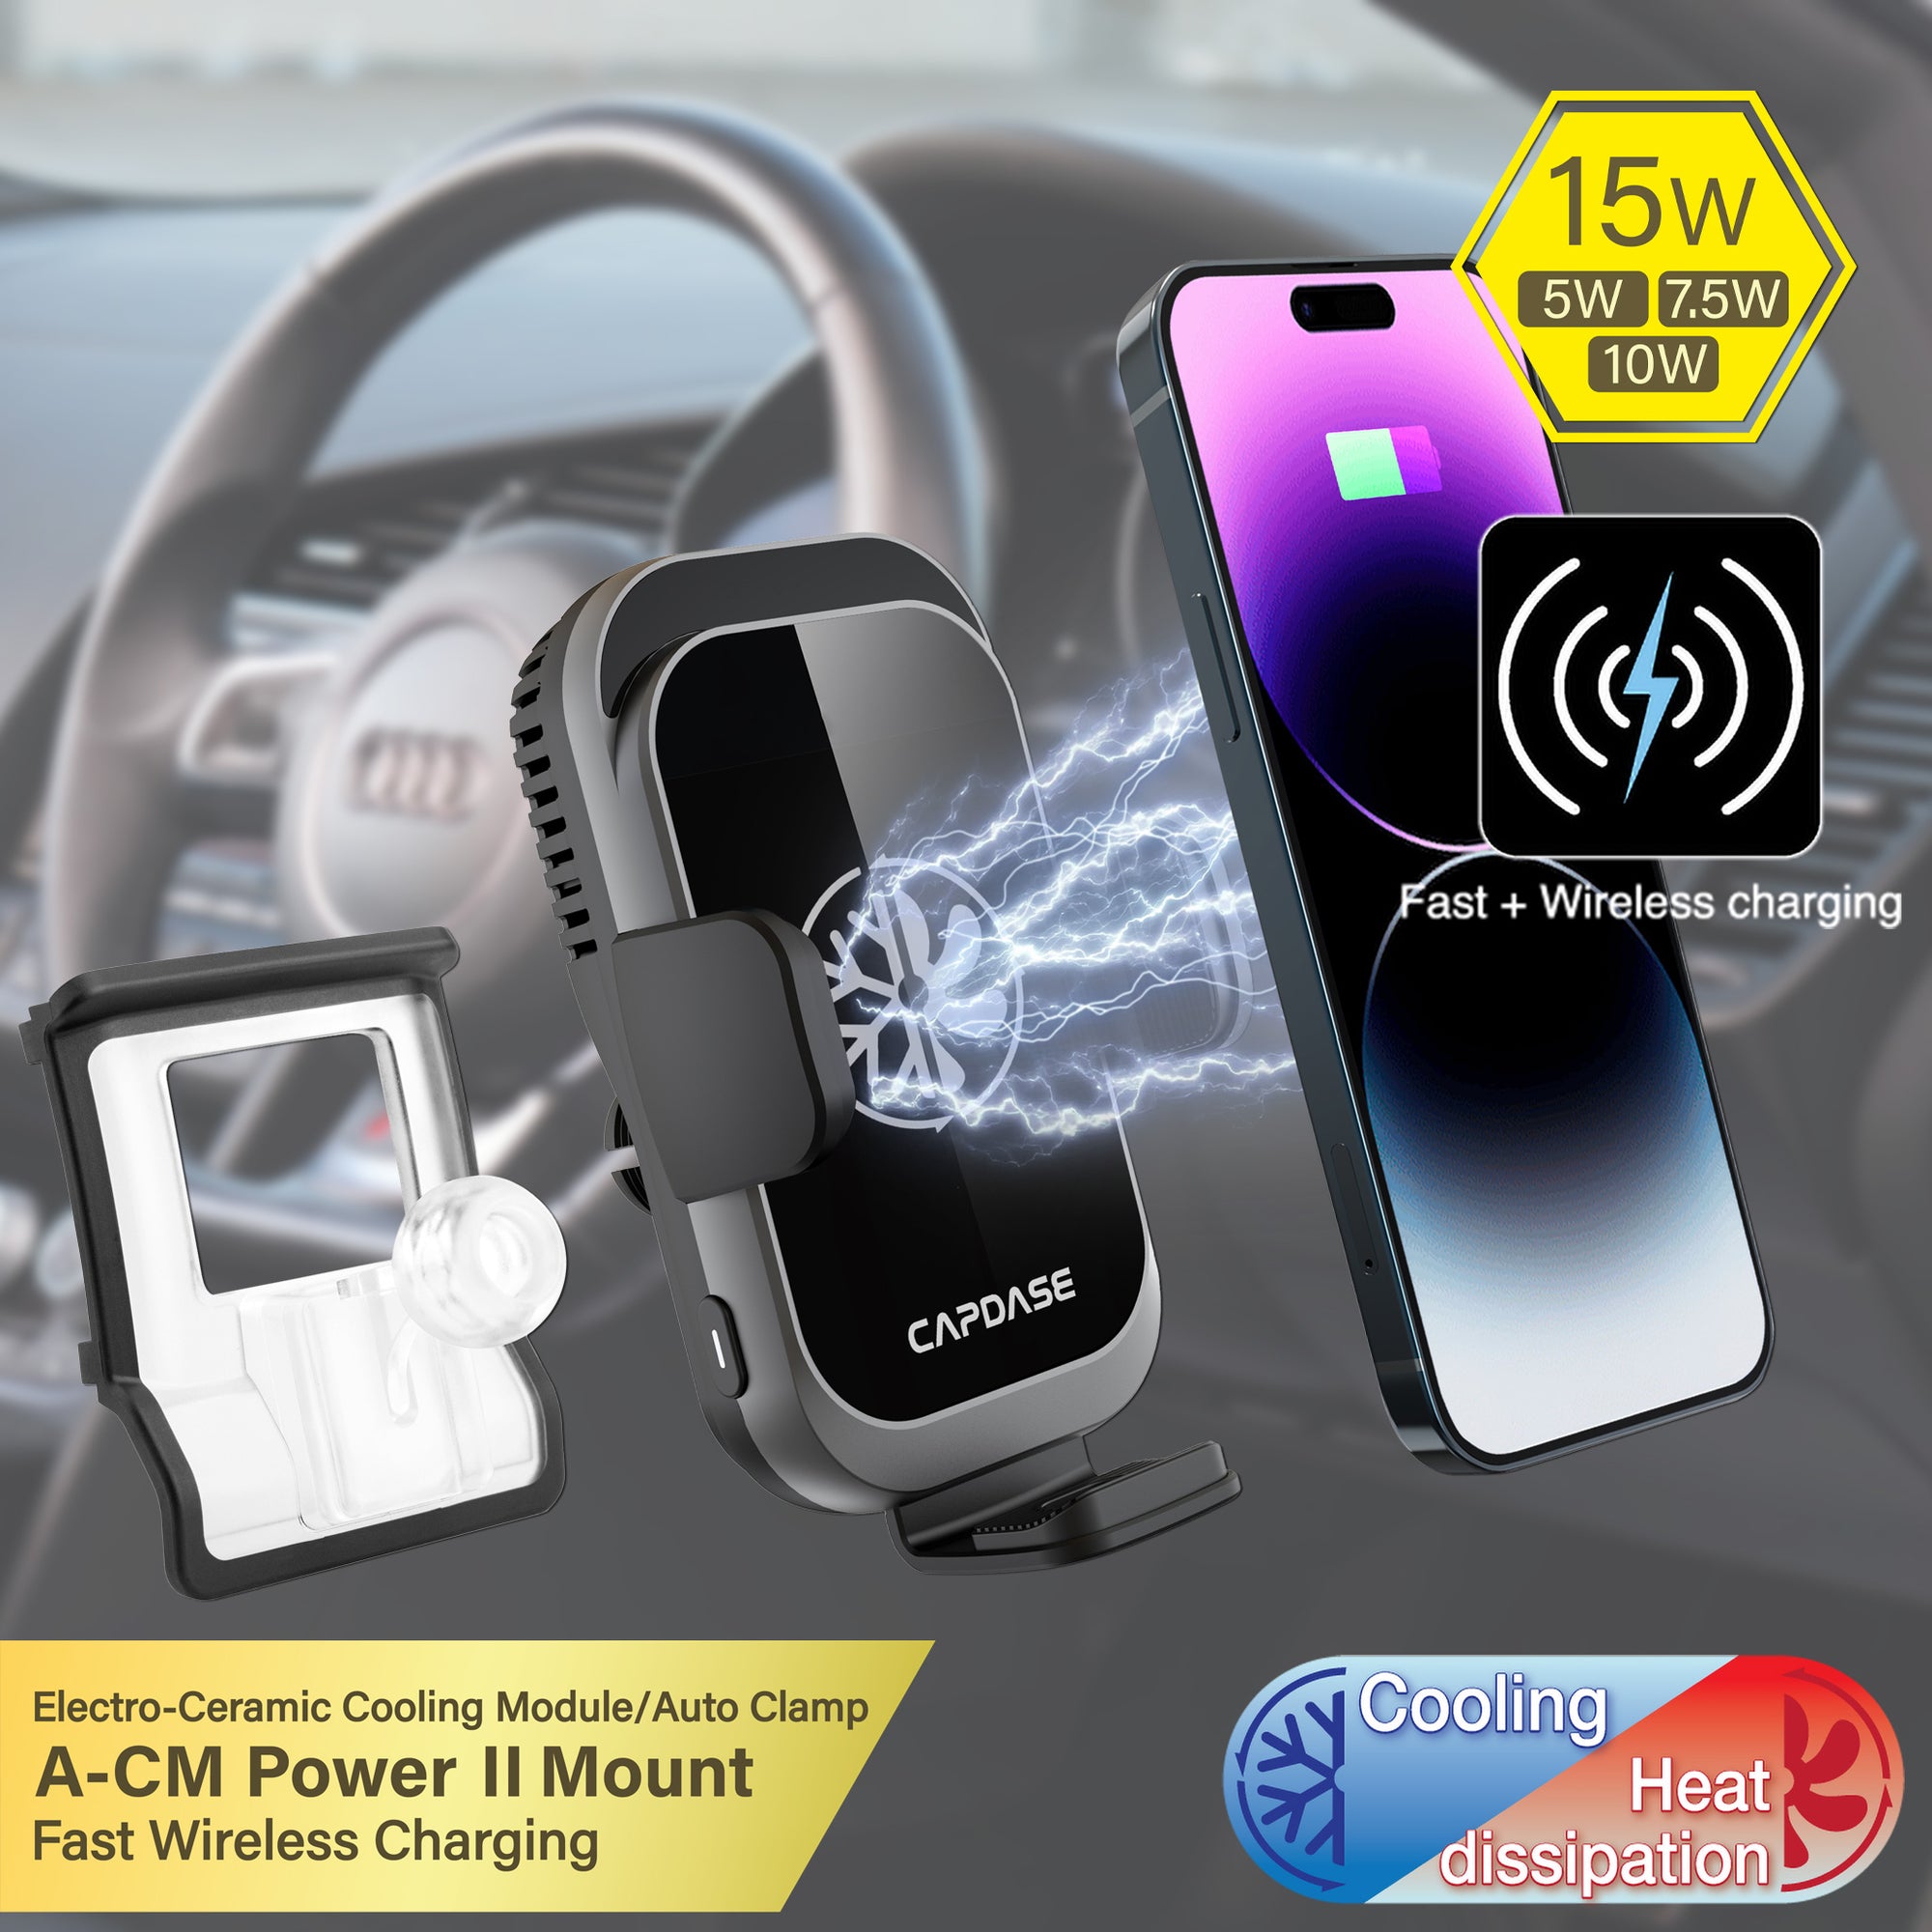 AA Power II Fast Wireless Charging Auto-Clamp & Auto-Alignment Car Mou -  Capdase